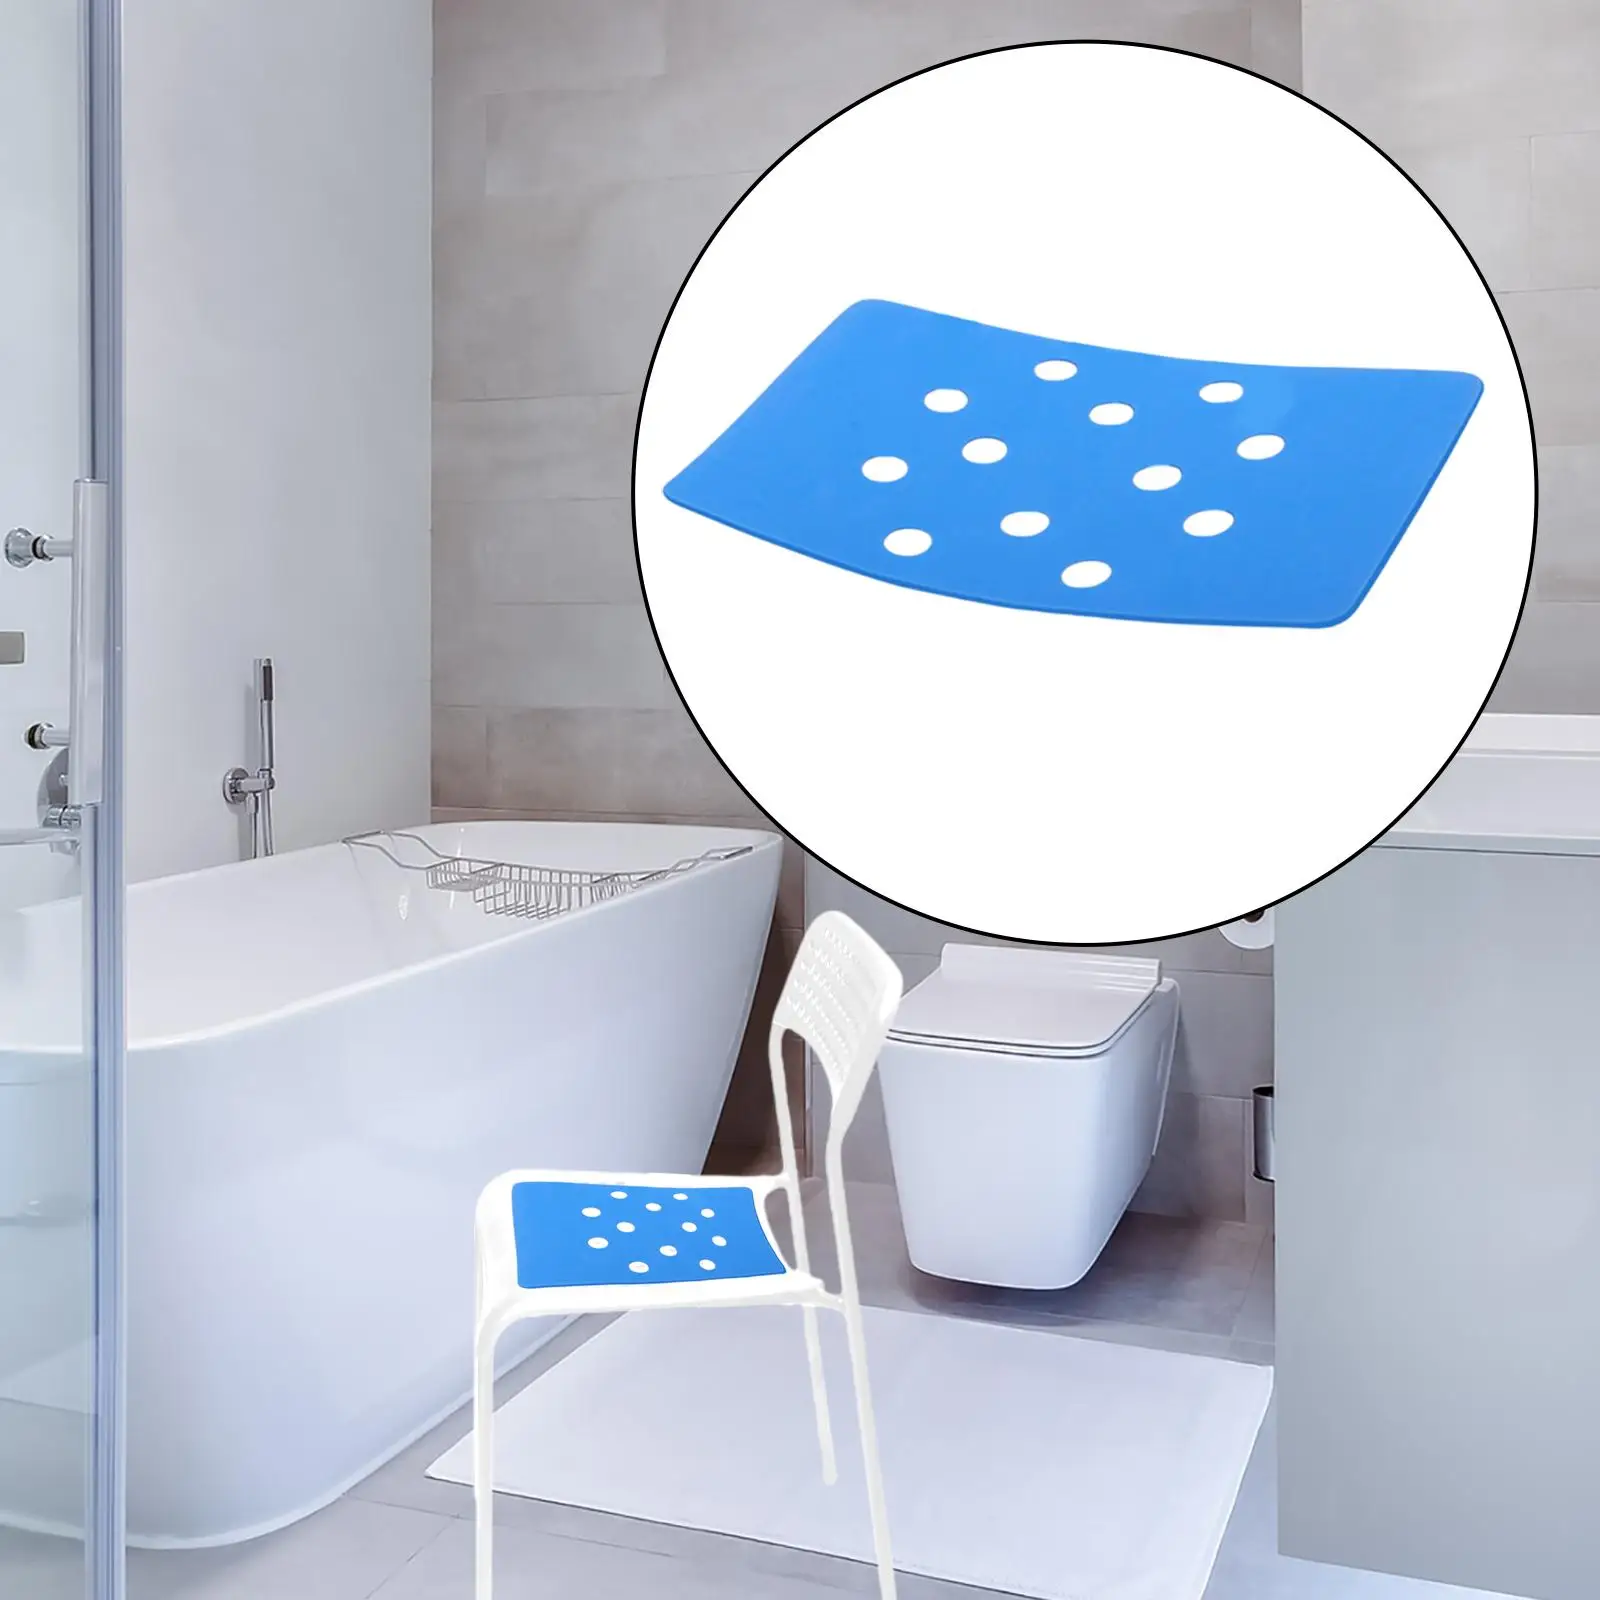 Shower Chair Seat Mat Adhesive Backing ,Made of Soft EVA Foam, Professional